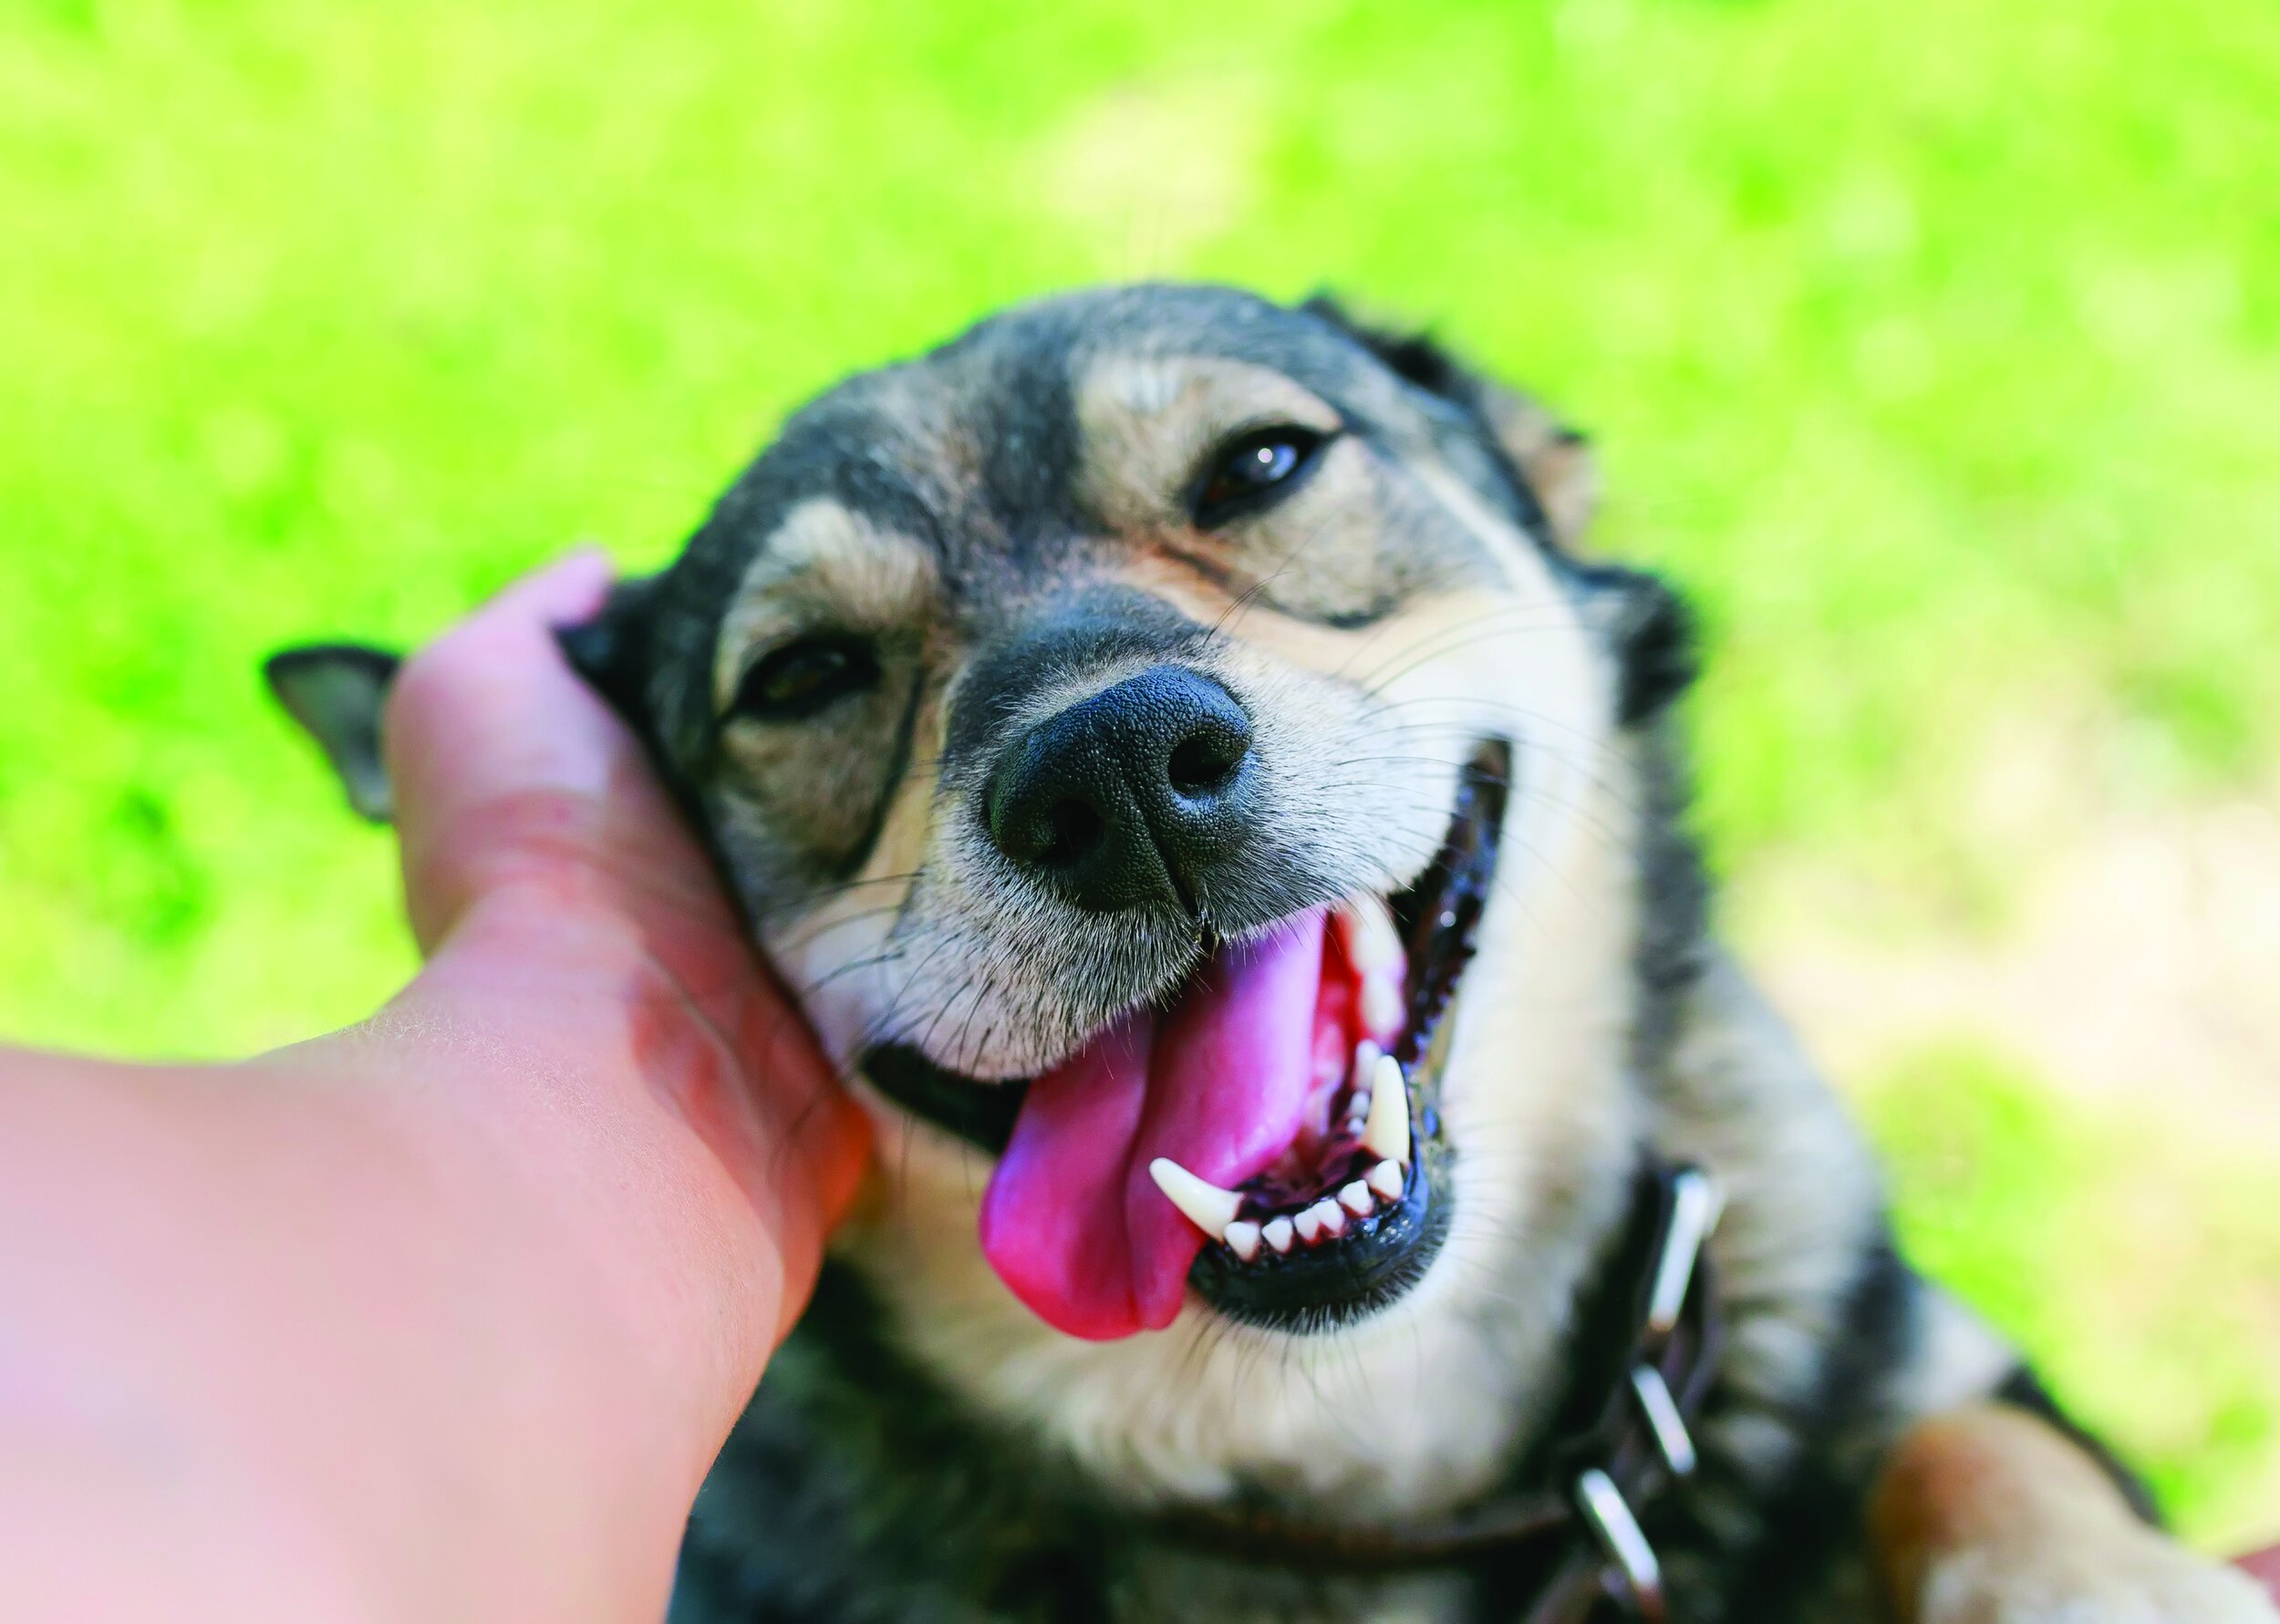 Dog smiling while being petted_CMYK_iStock-1041987360.jpg